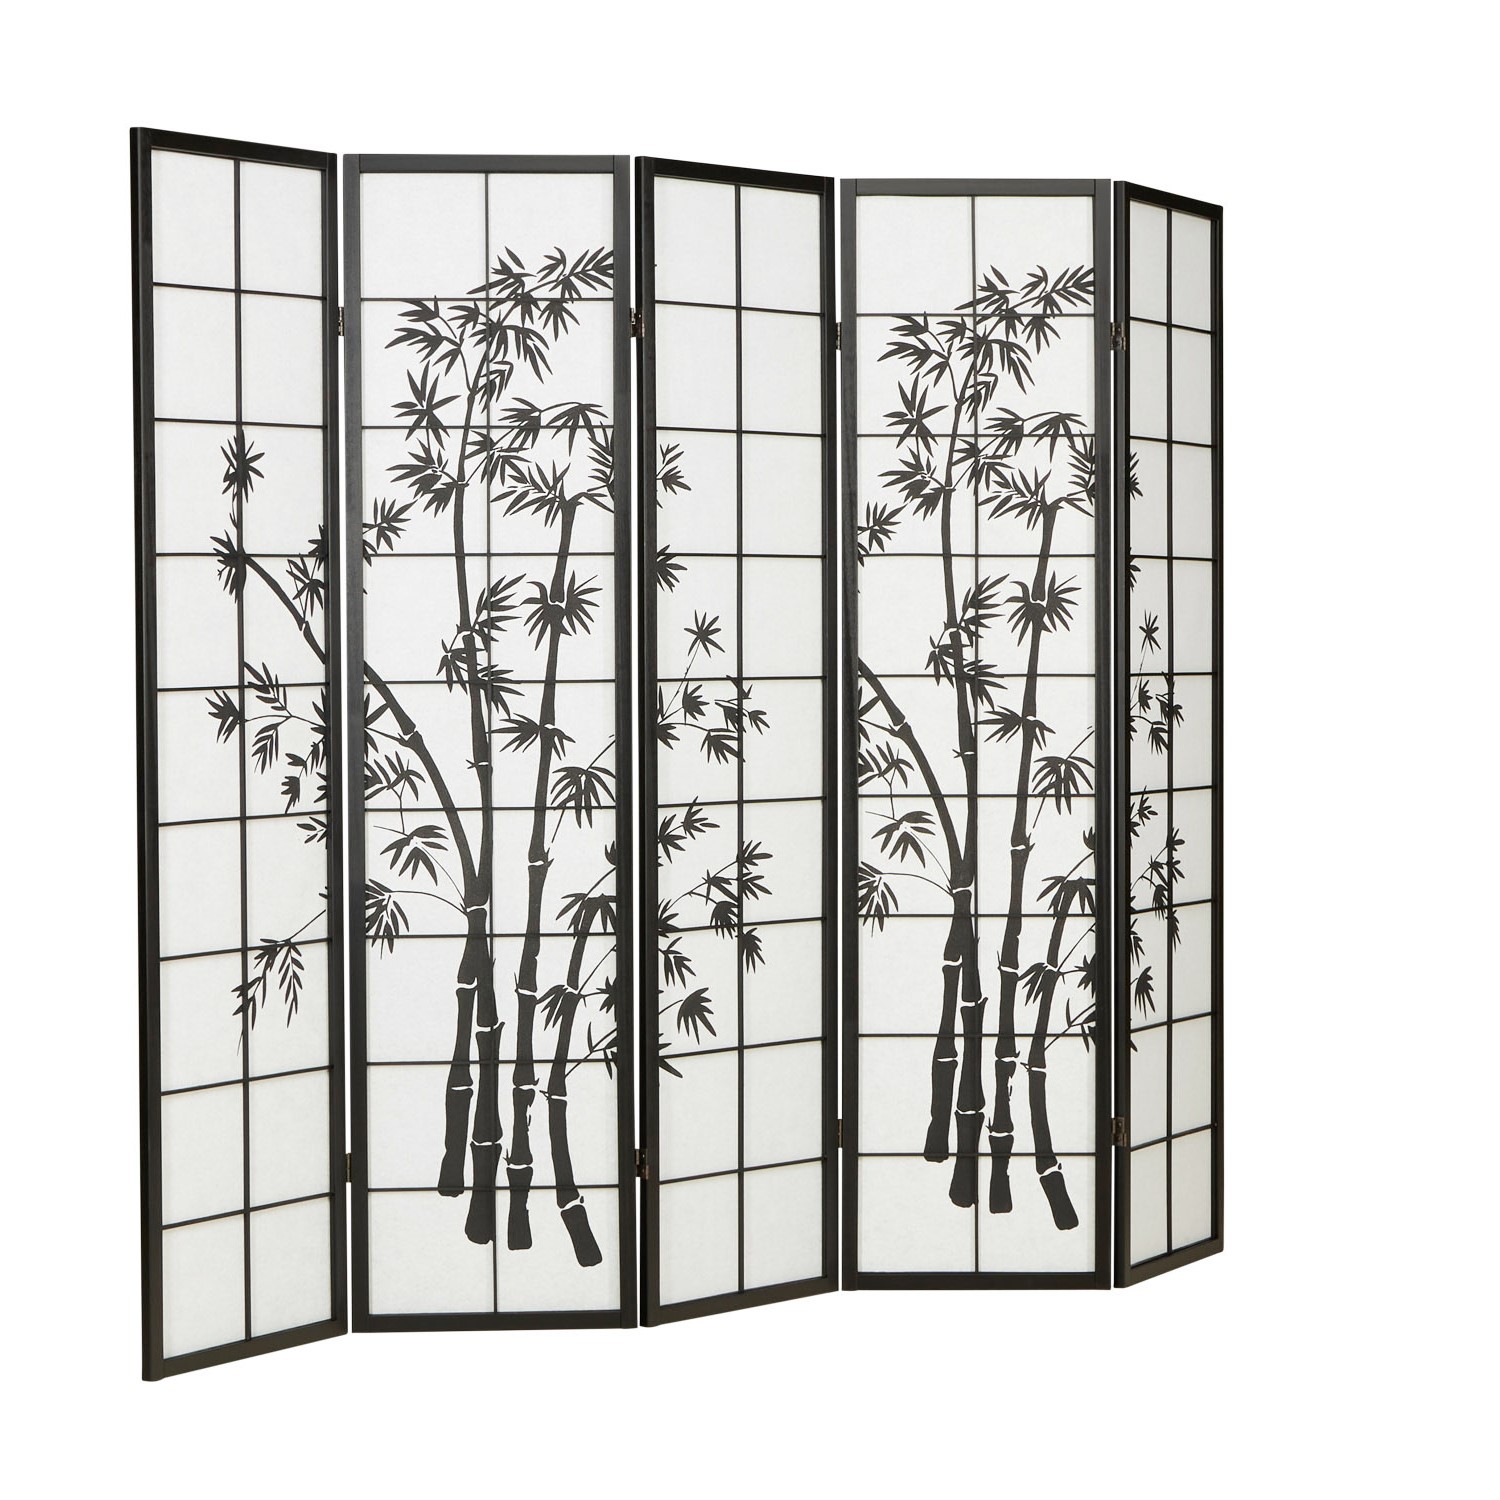 Paravent room divider 5 pieces, wood black, rice paper white, bamboo pattern, height 179 cm	